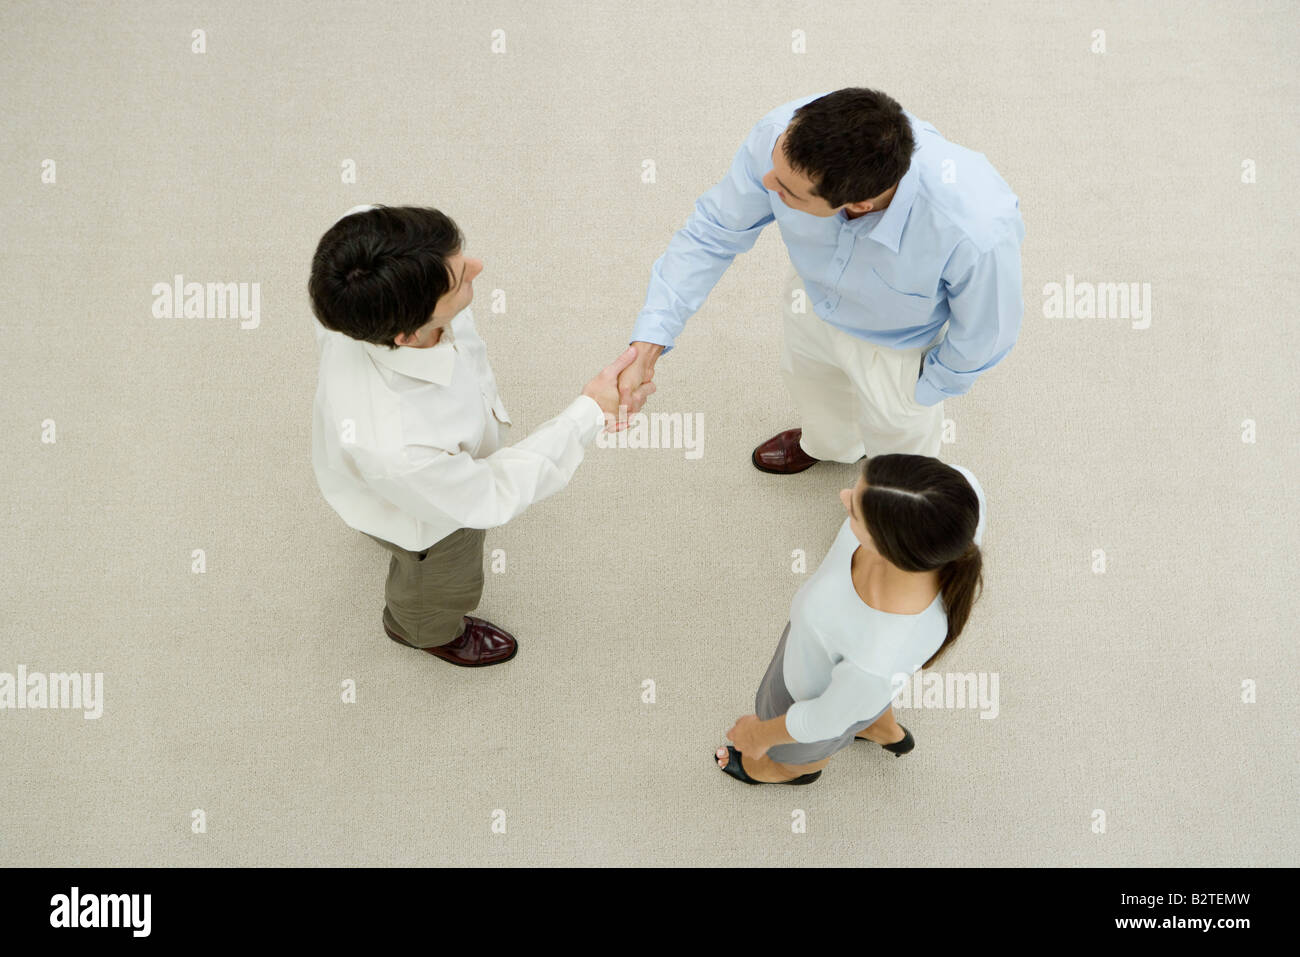 Two men shaking hands, female colleague watching, overhead view Stock Photo